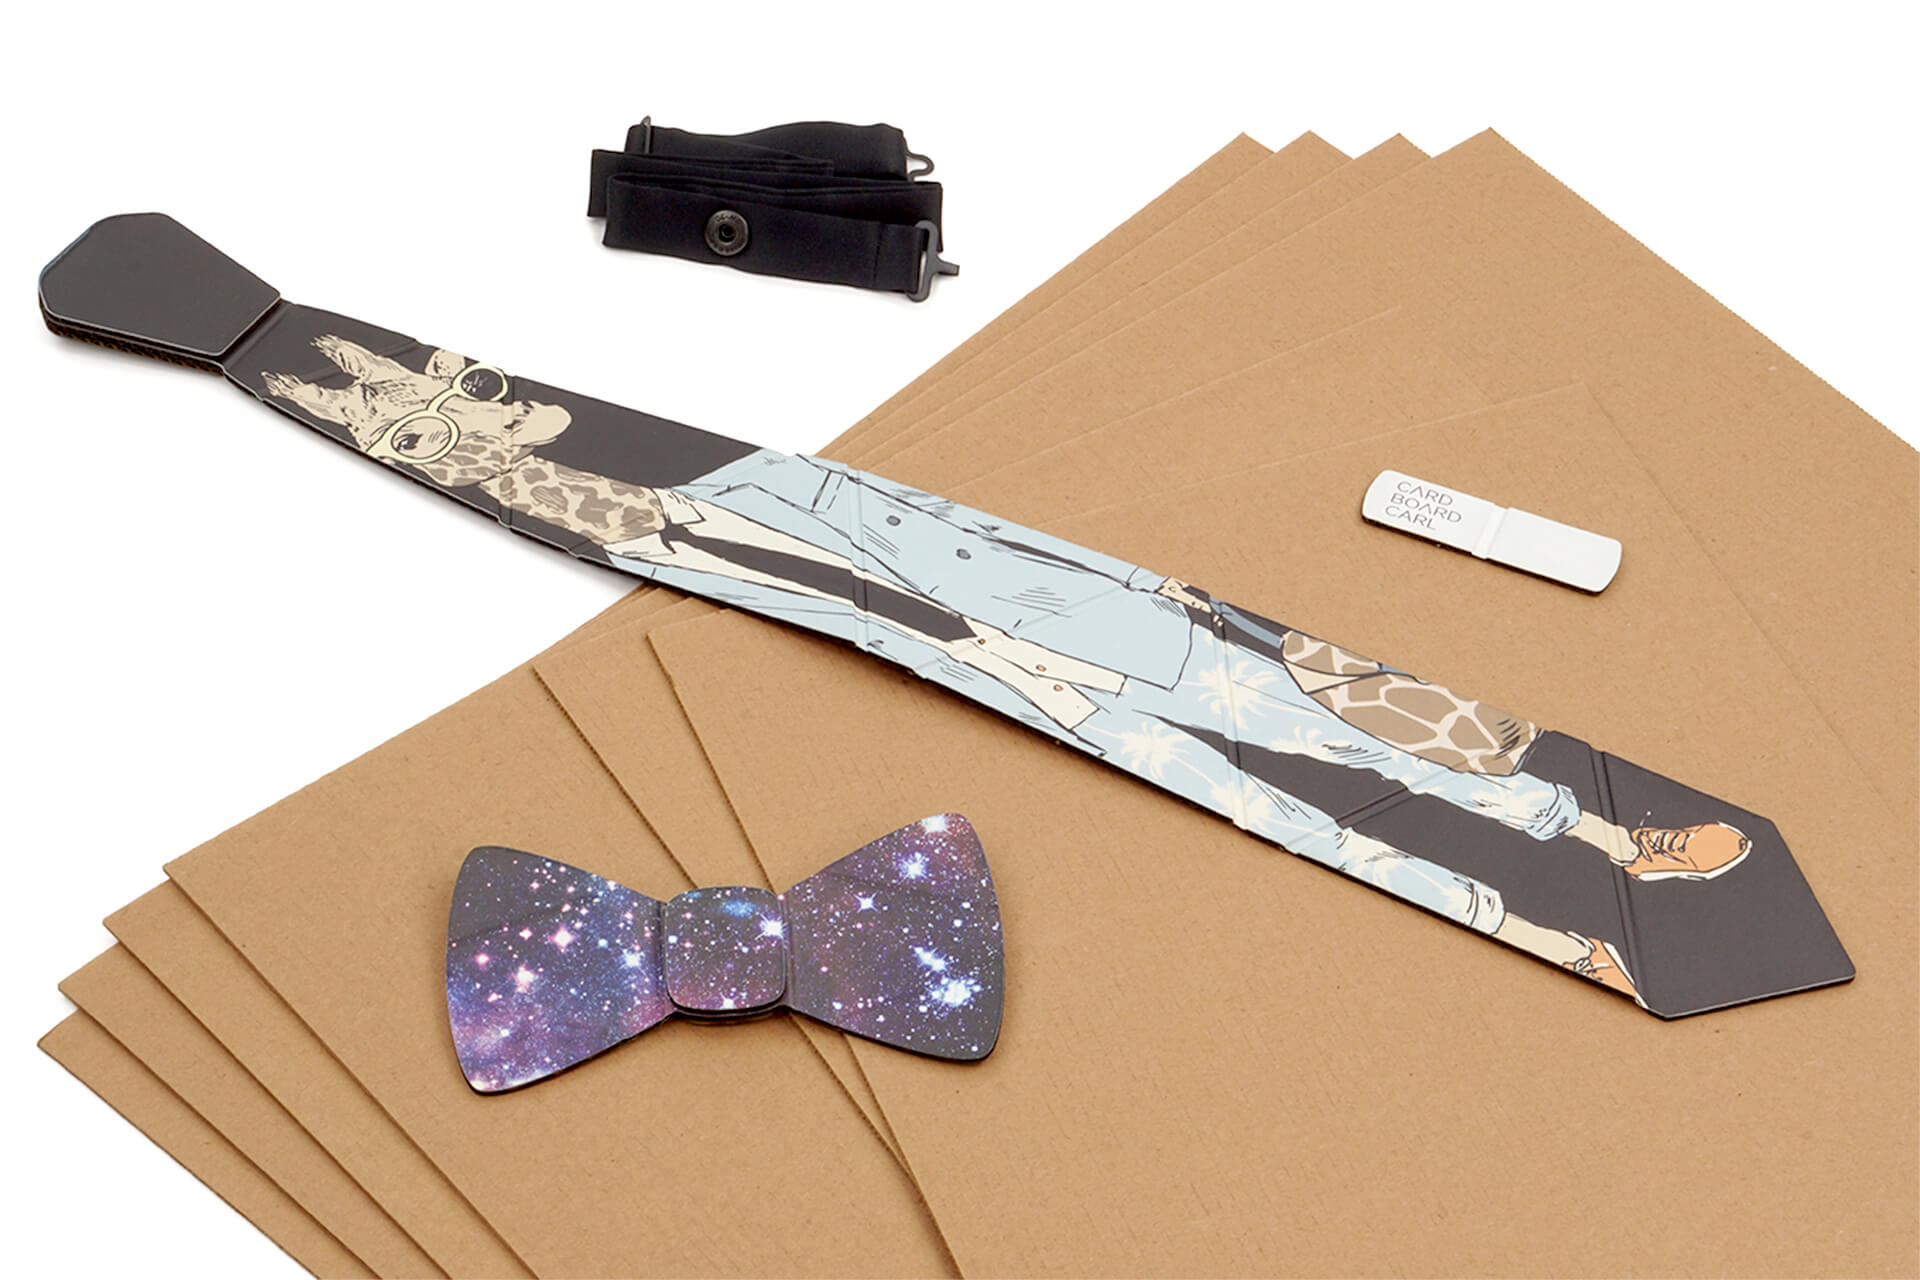 A cardboard neck tie and bow tie resting on cardboard sheets